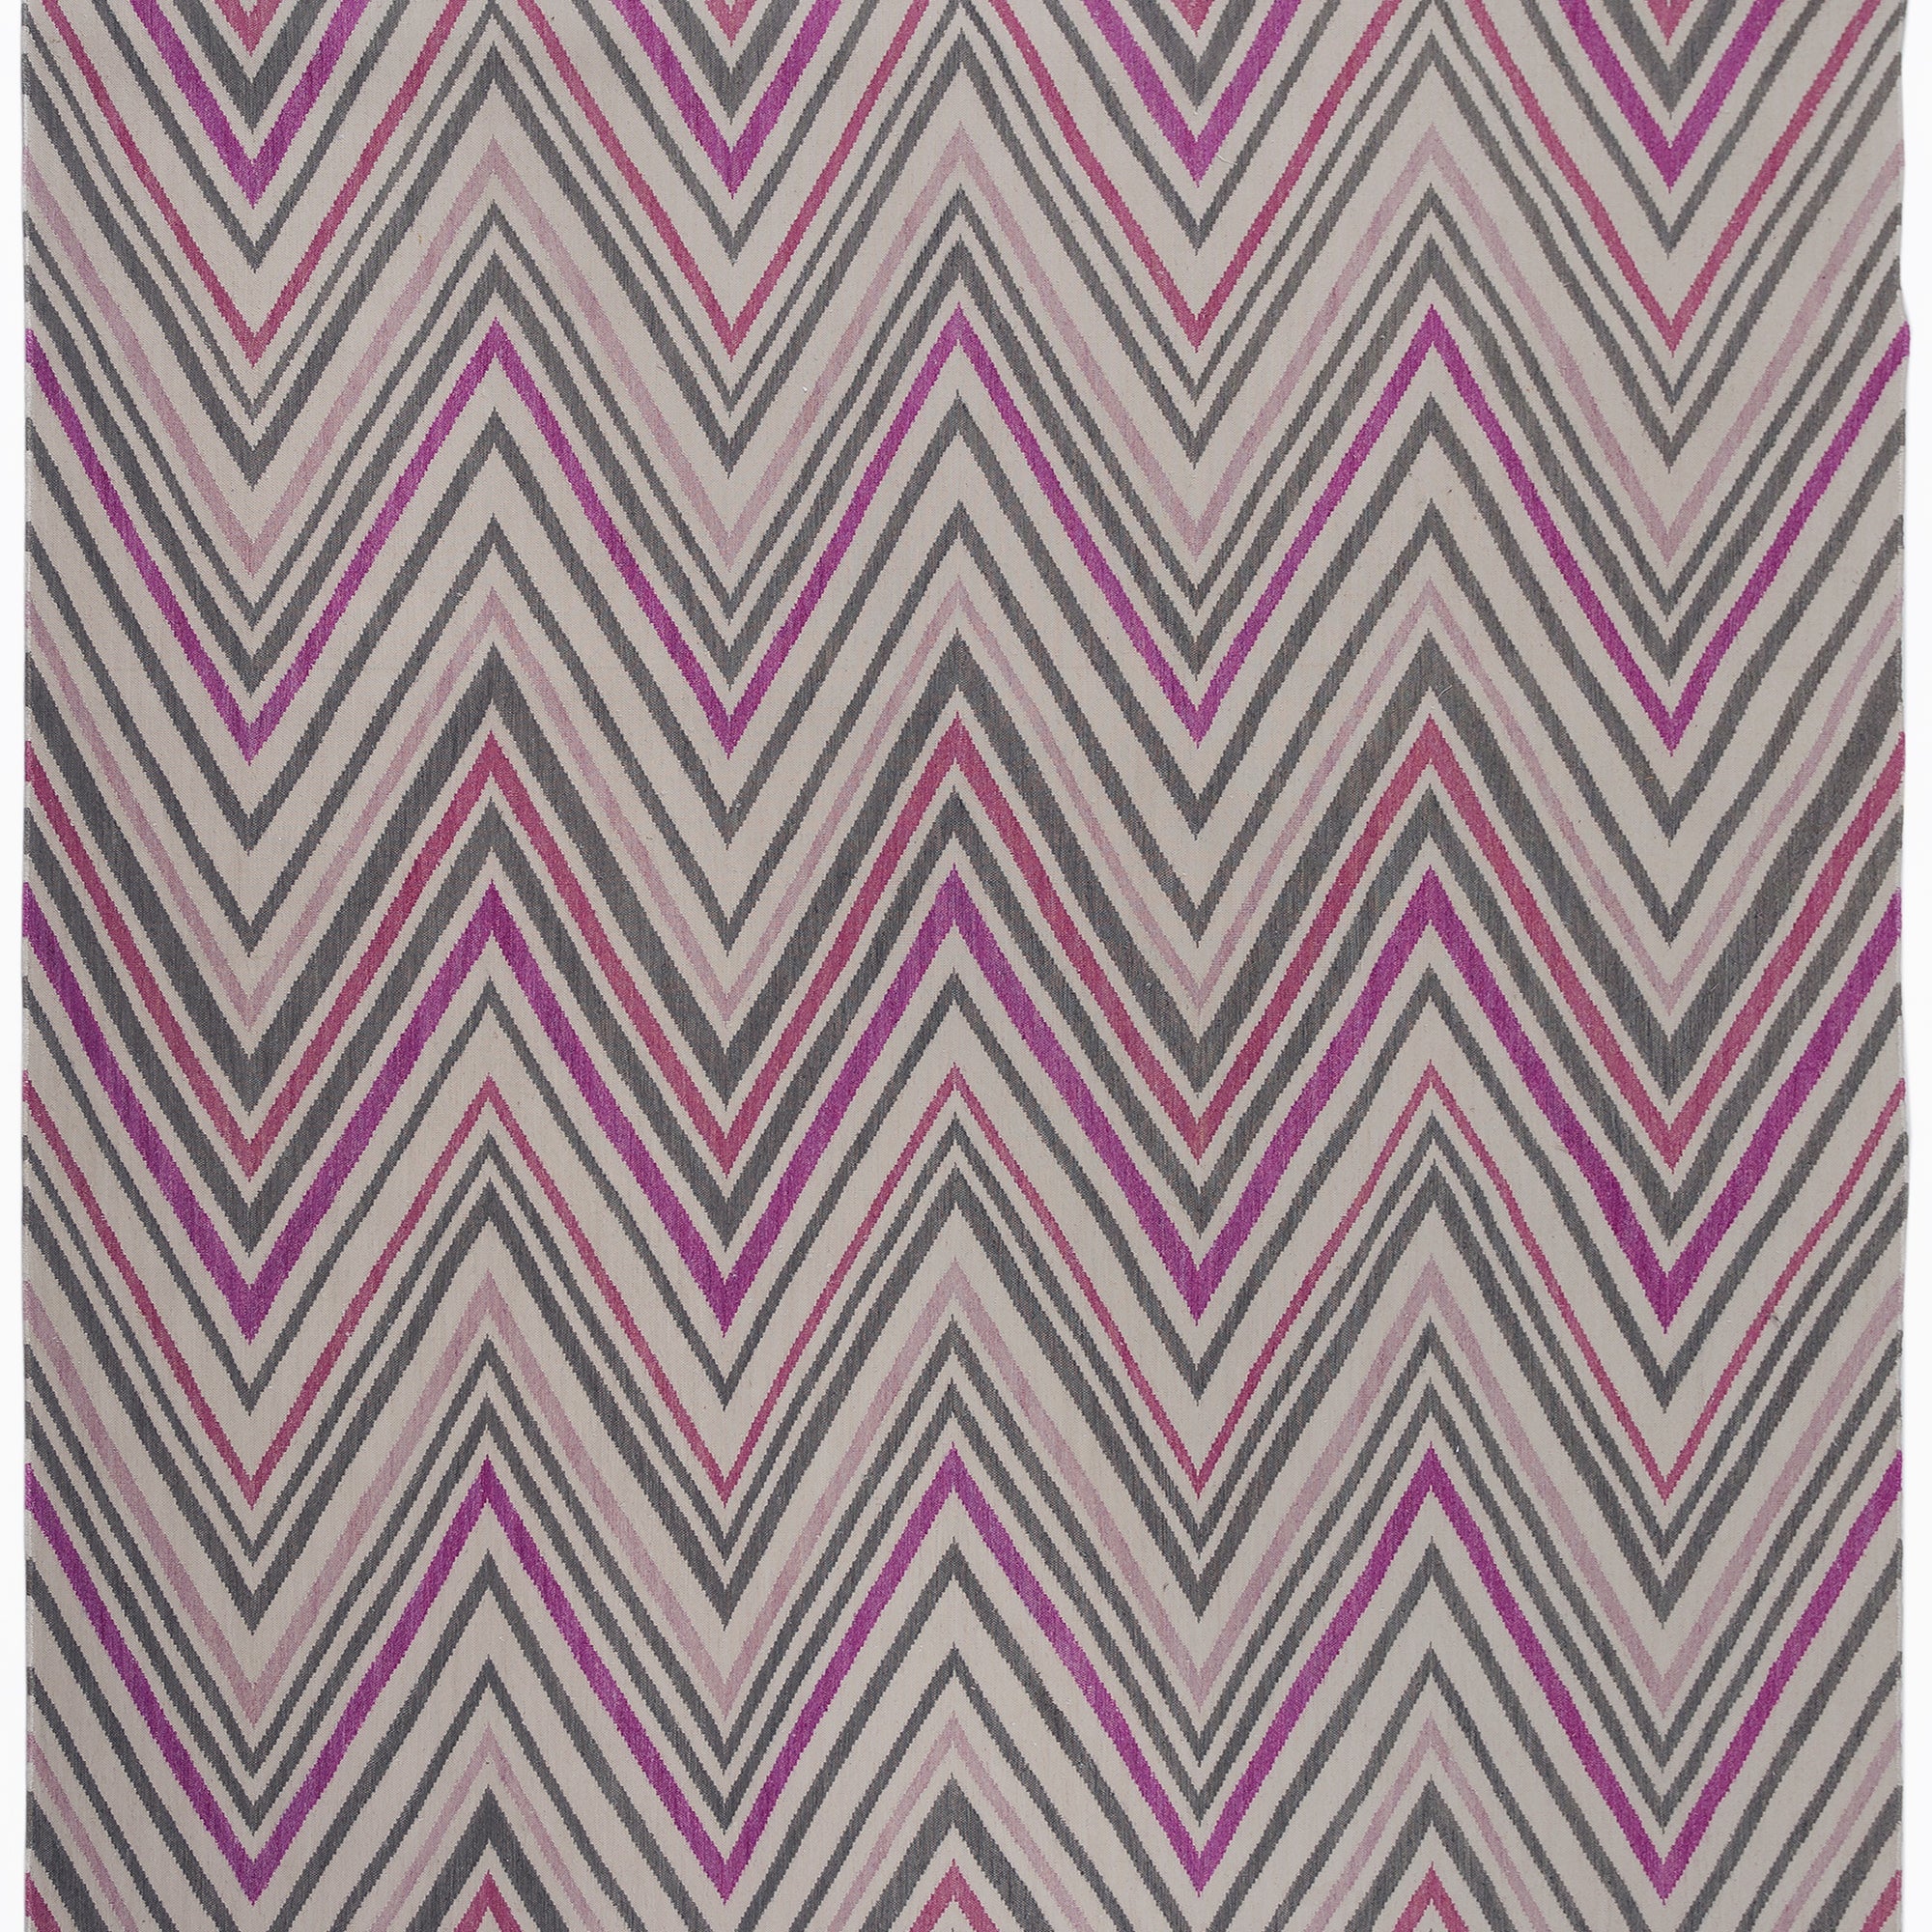 Zig Zag Rug in Ruby-Rose, a mutli color zig zag pattern in fucshia, magenta, link and charcoal on a white field with a tassled edge. 